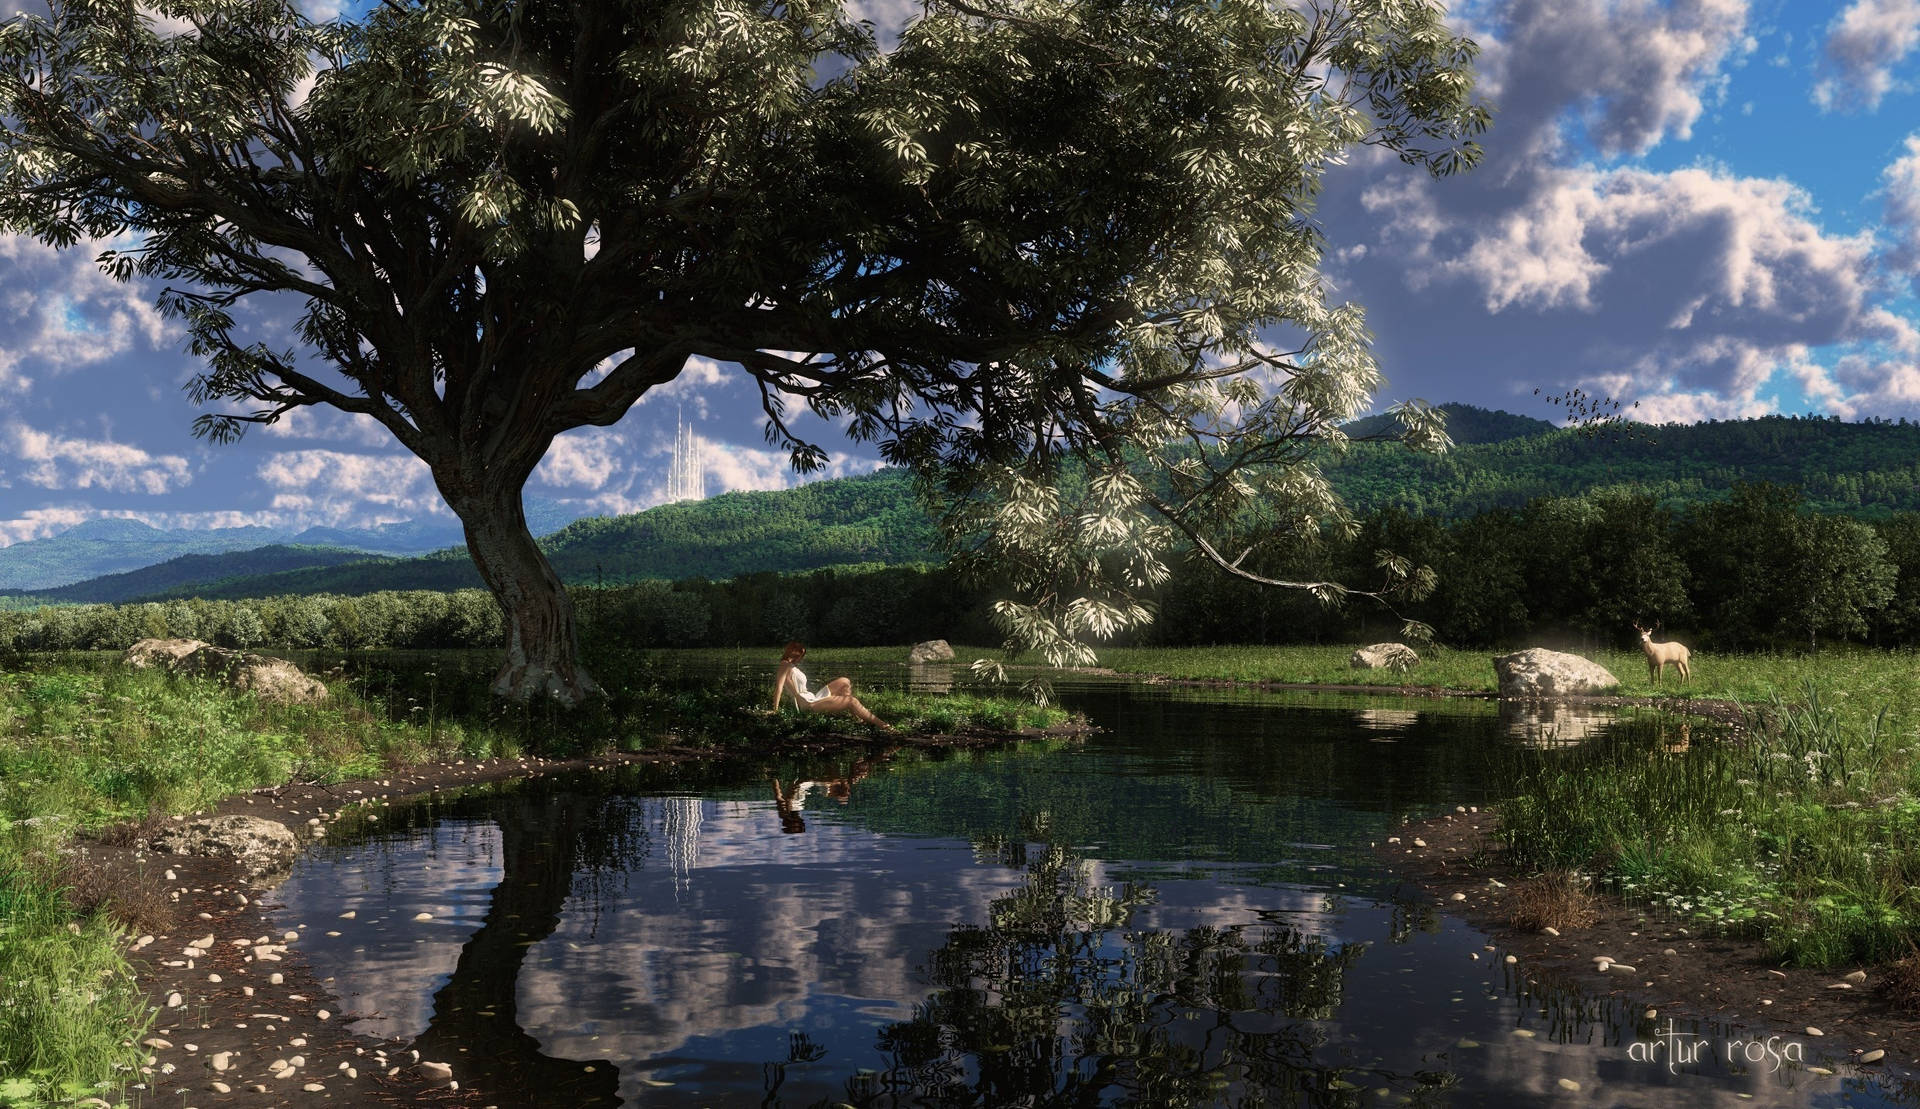 Fantasy art mountain landscape with woman under the tree wallpaper.